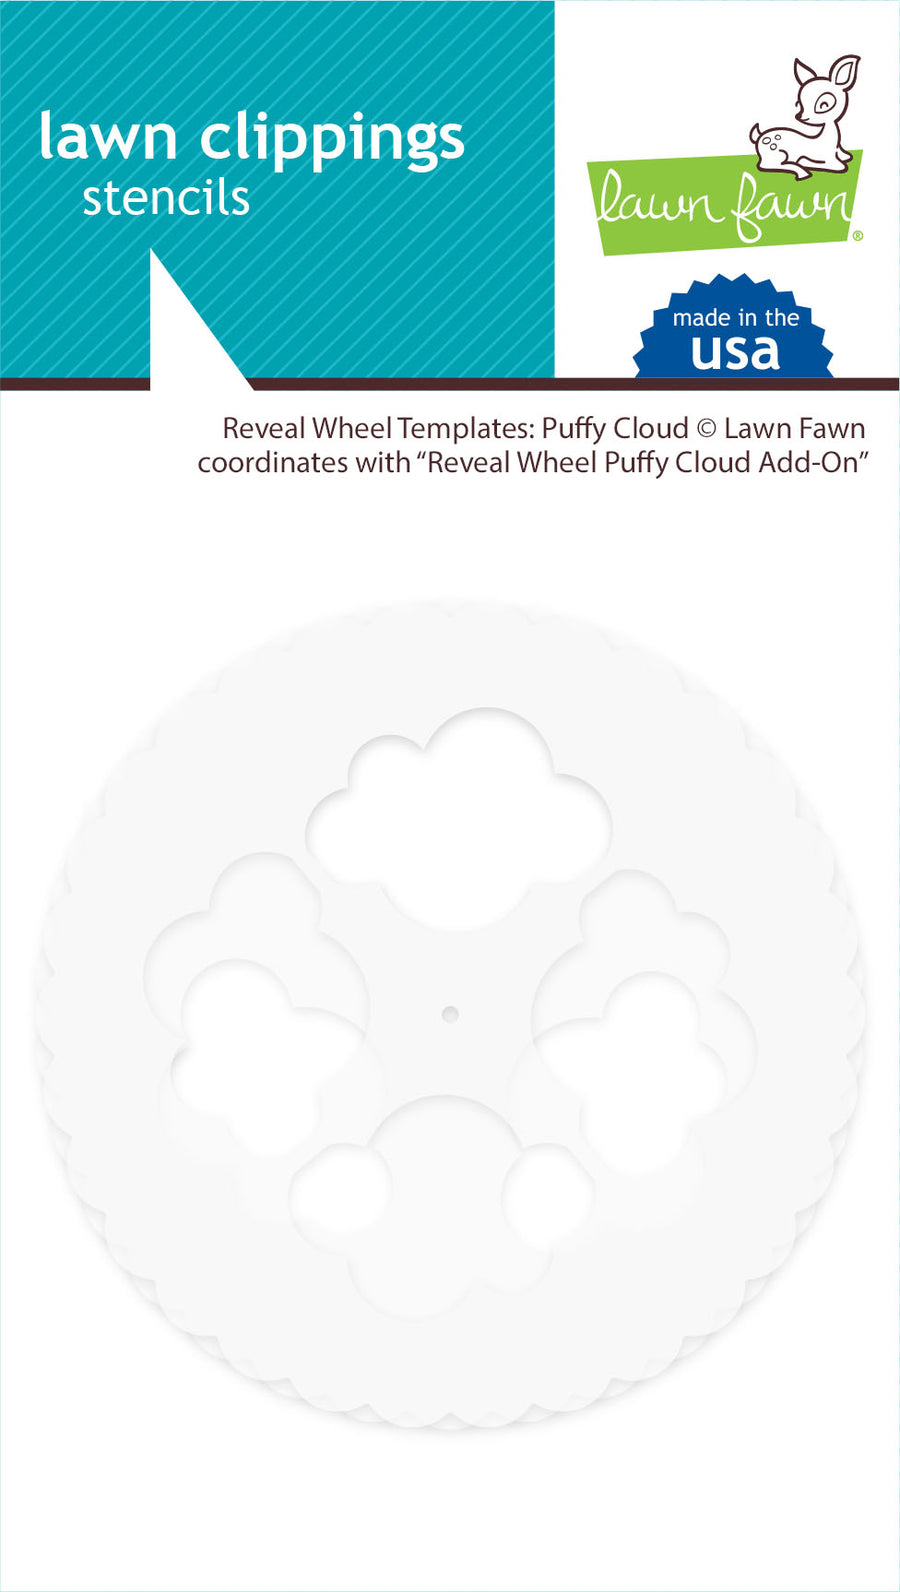 LF2350 Lawn Clippings Reveal Wheel Templates Puffy Cloud